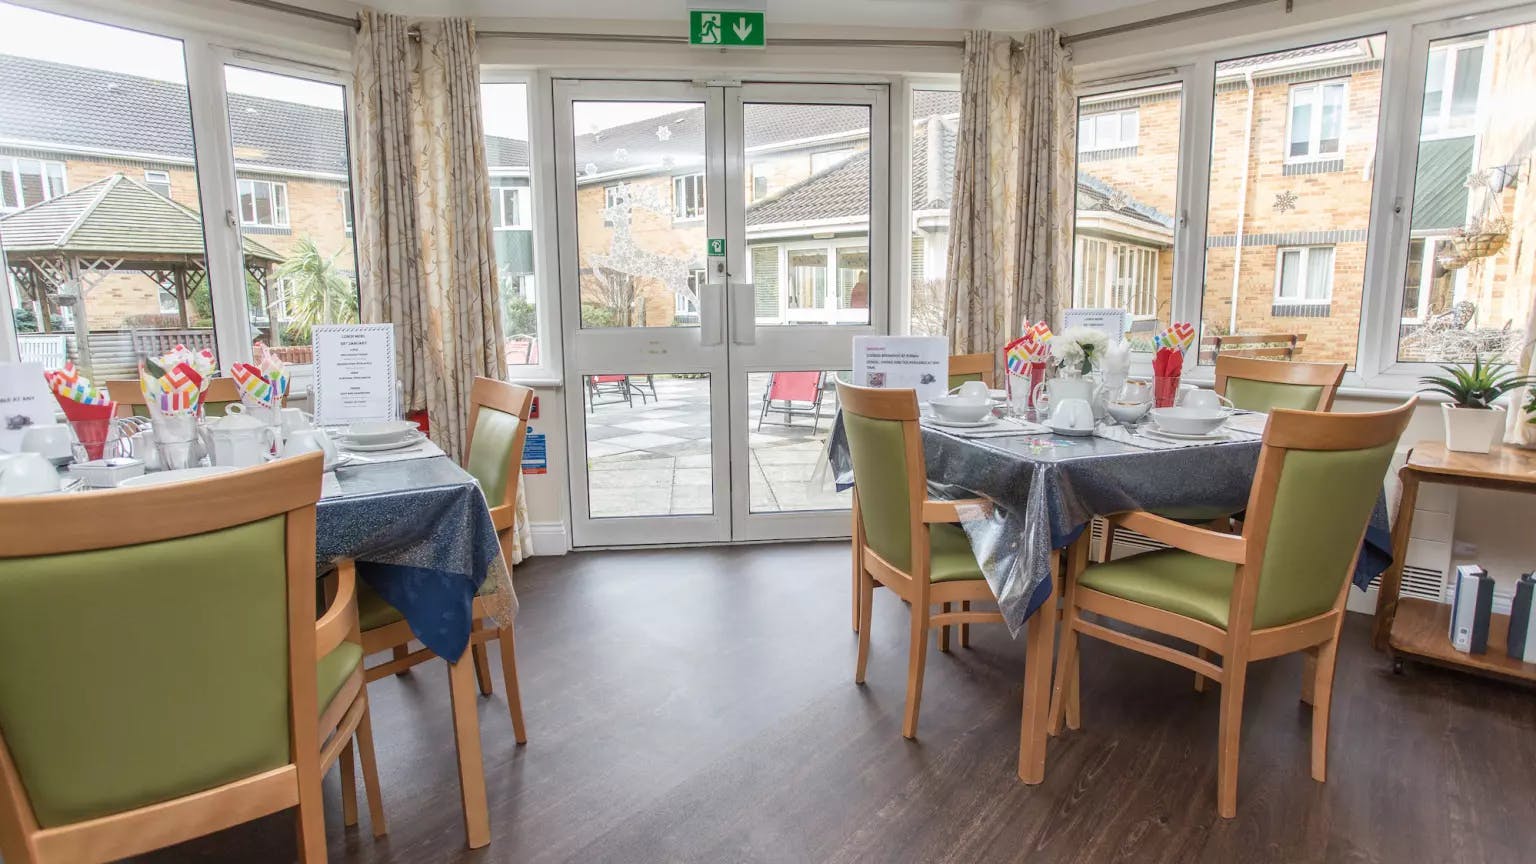 Dining area of Willow Court care home in Harpenden, Hertfordshire